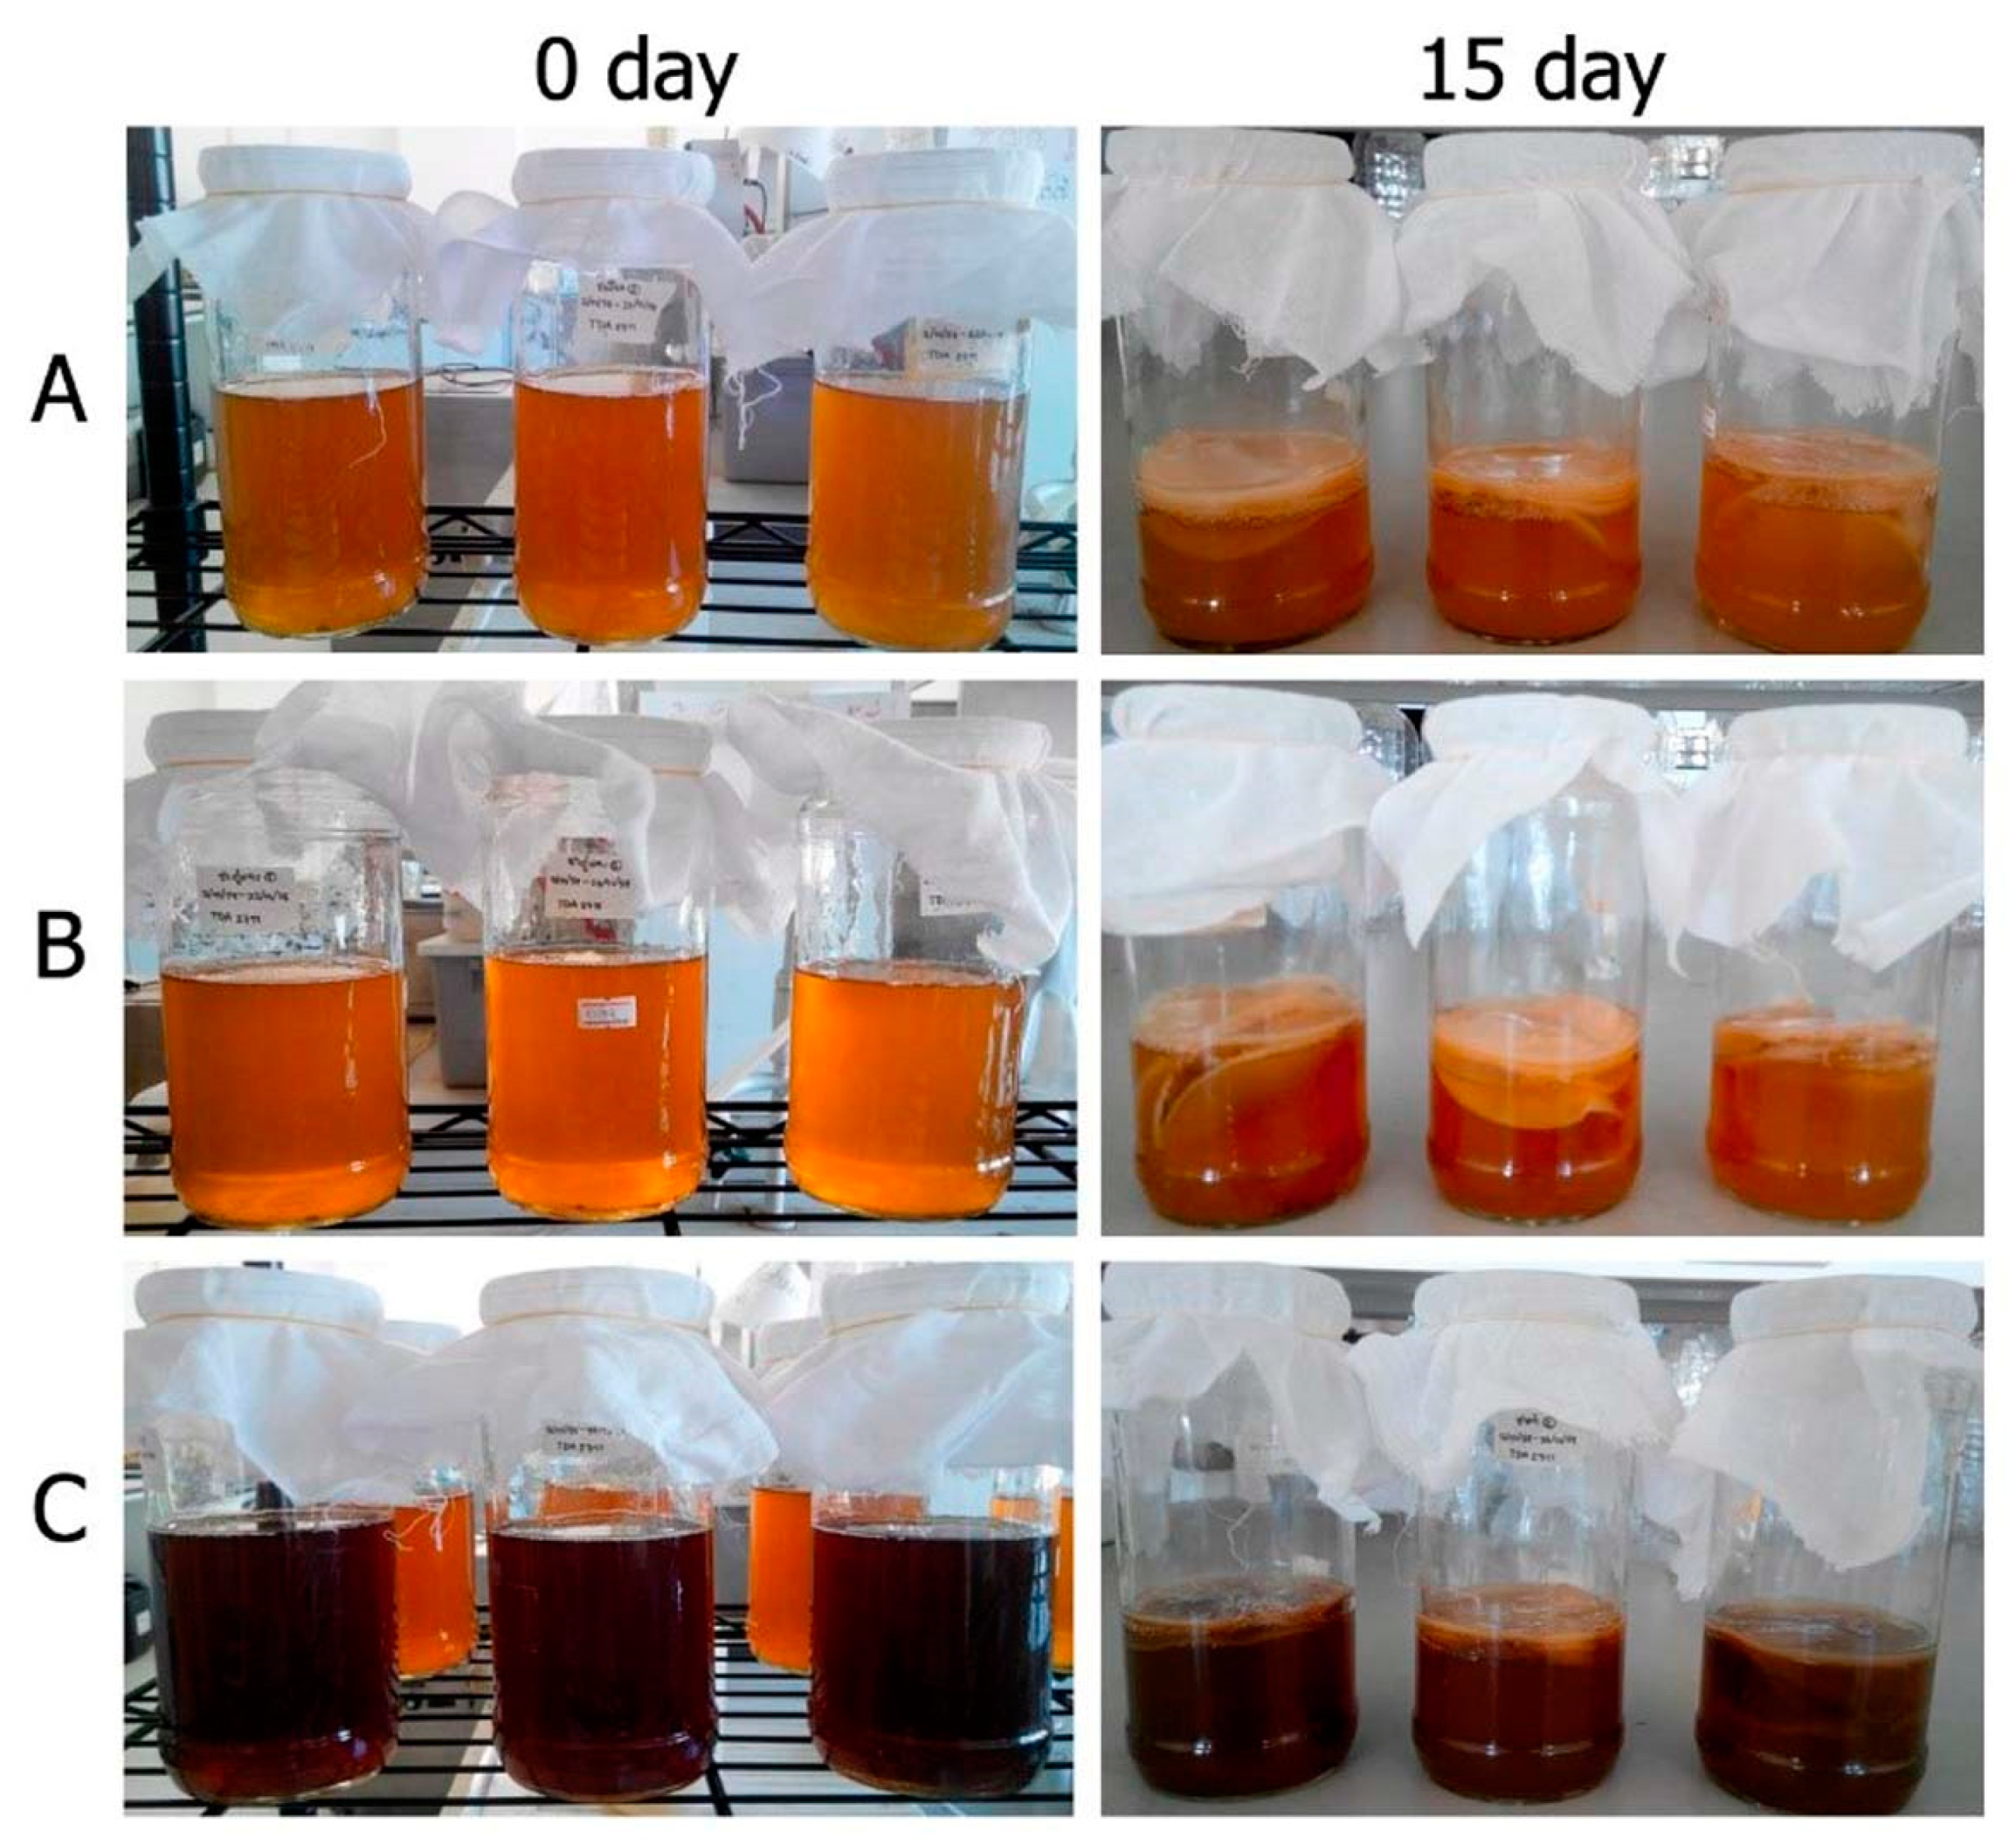 Microorganisms | Free Full-Text | Efficacy of Kombucha Obtained from Green,  Oolong, and Black Teas on Inhibition of Pathogenic Bacteria, Antioxidation,  and Toxicity on Colorectal Cancer Cell Line | HTML